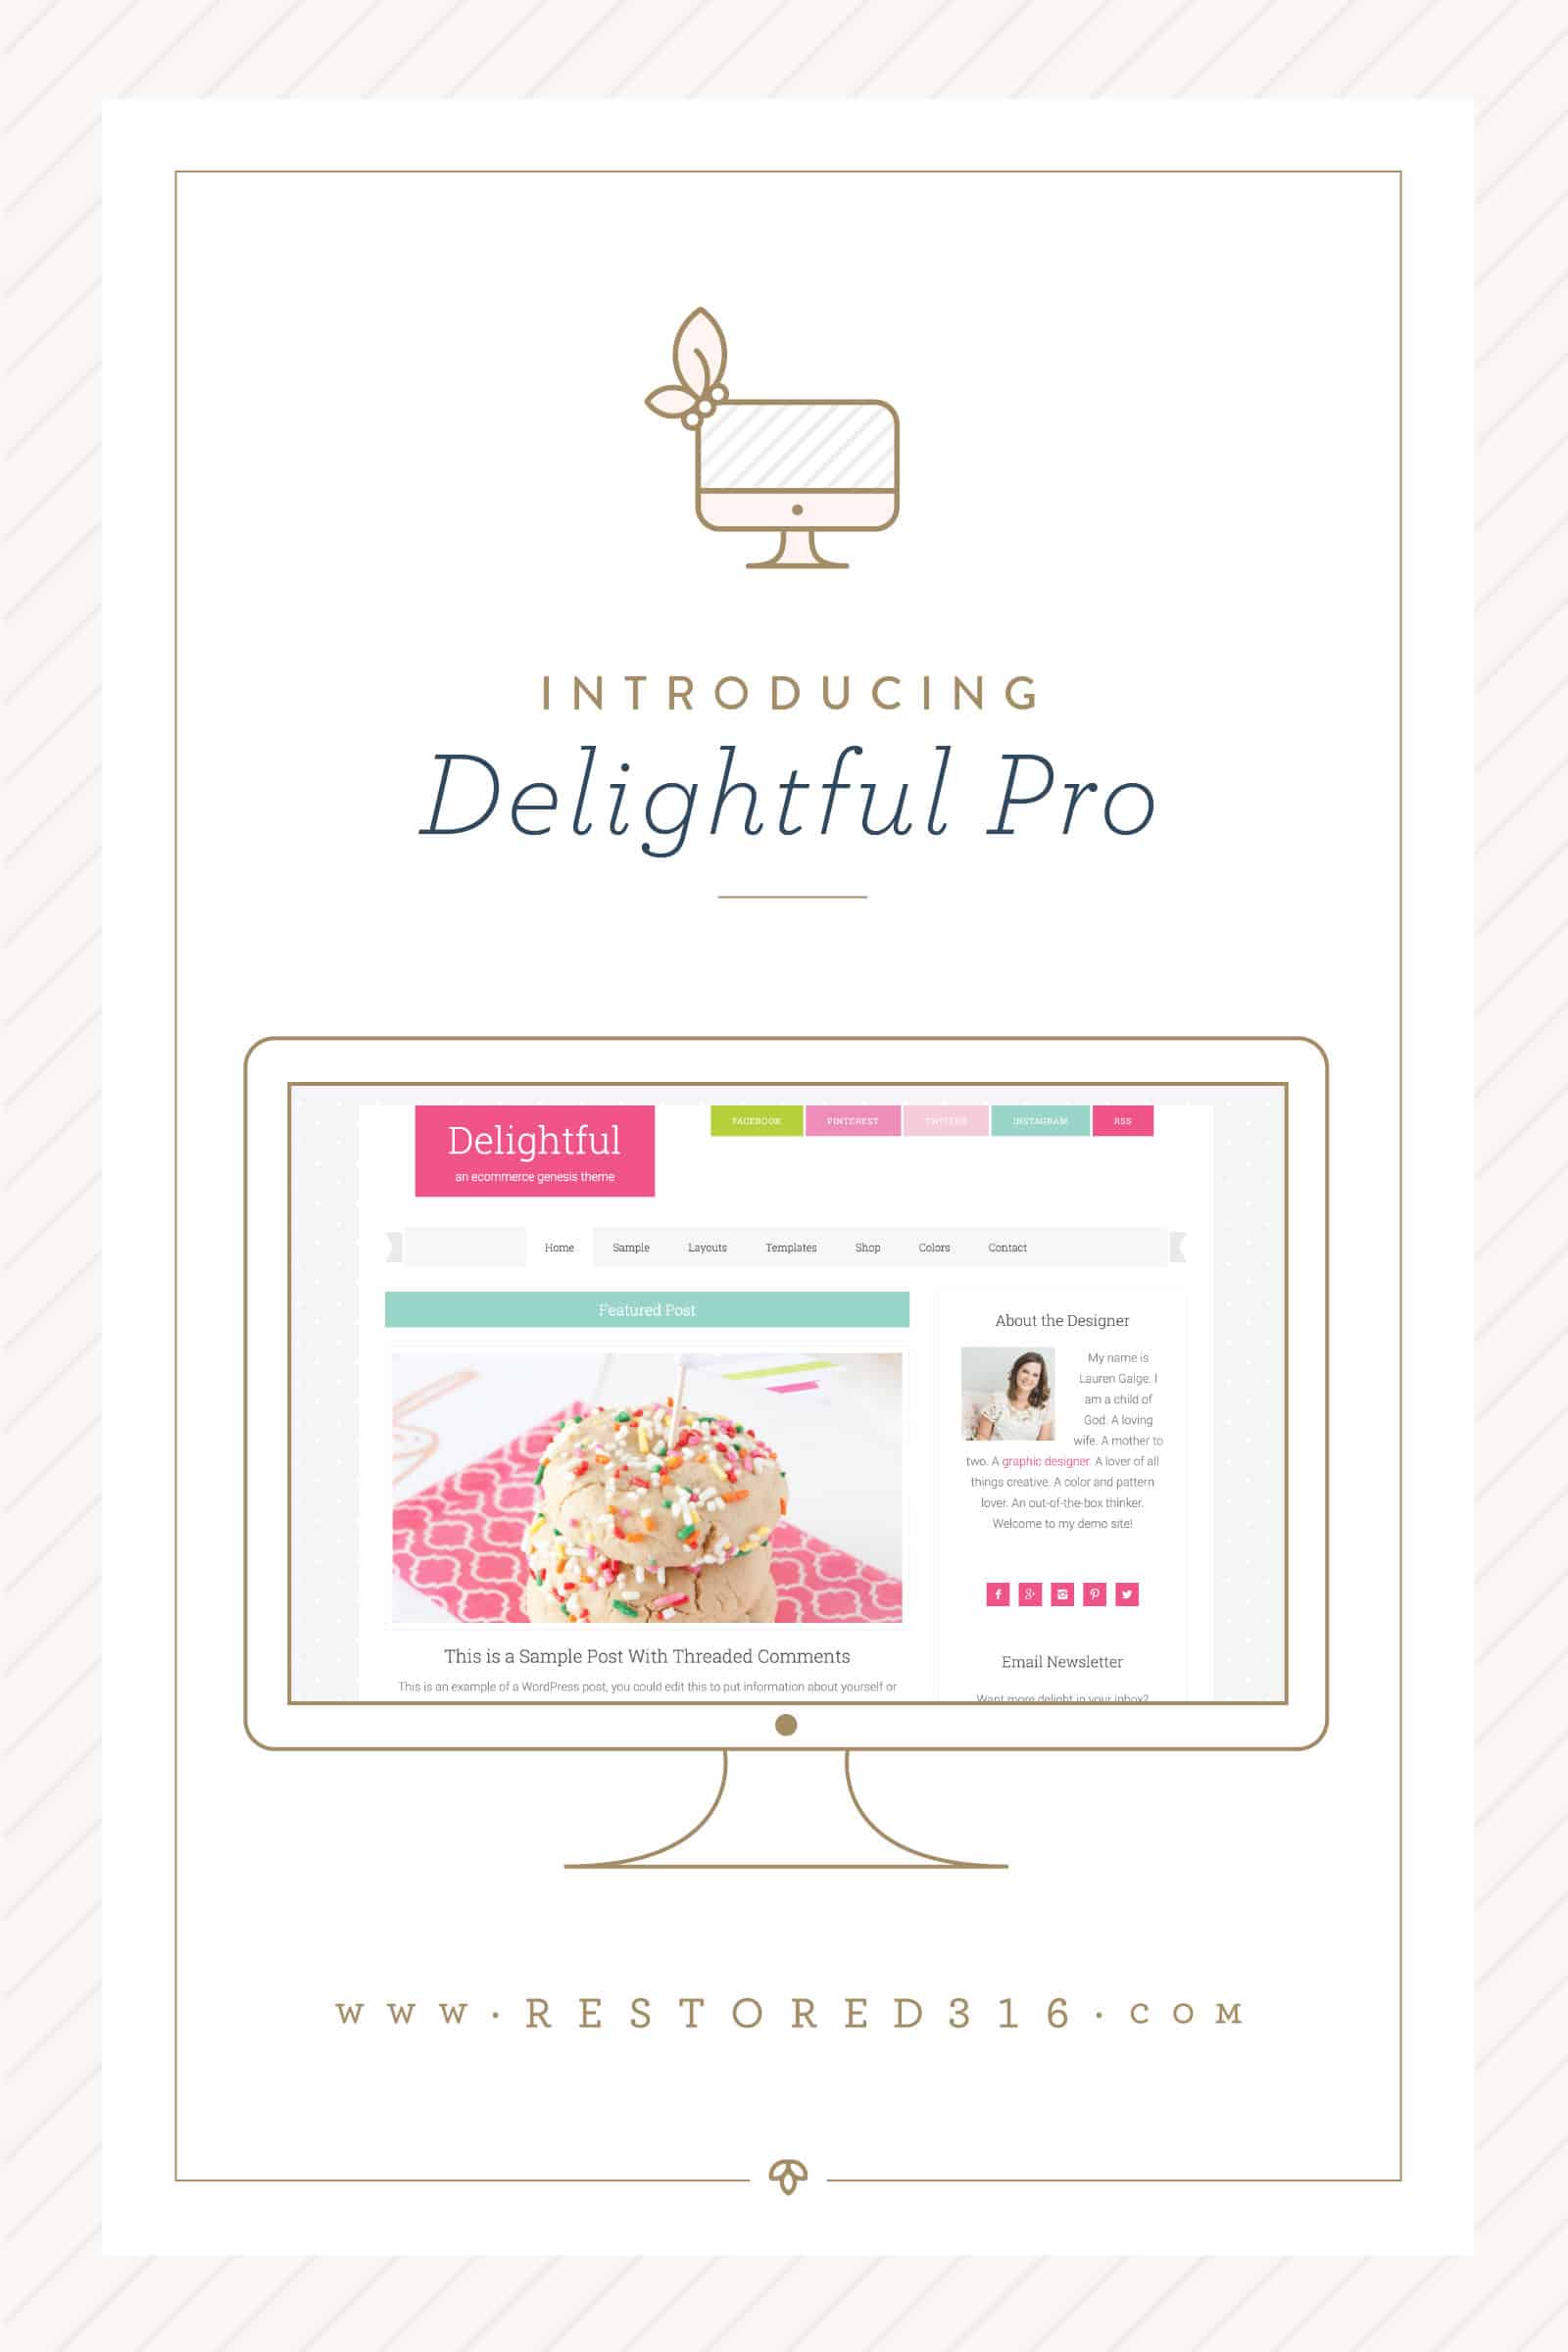 Introducing Delightful Pro- an ecommerce genesis theme